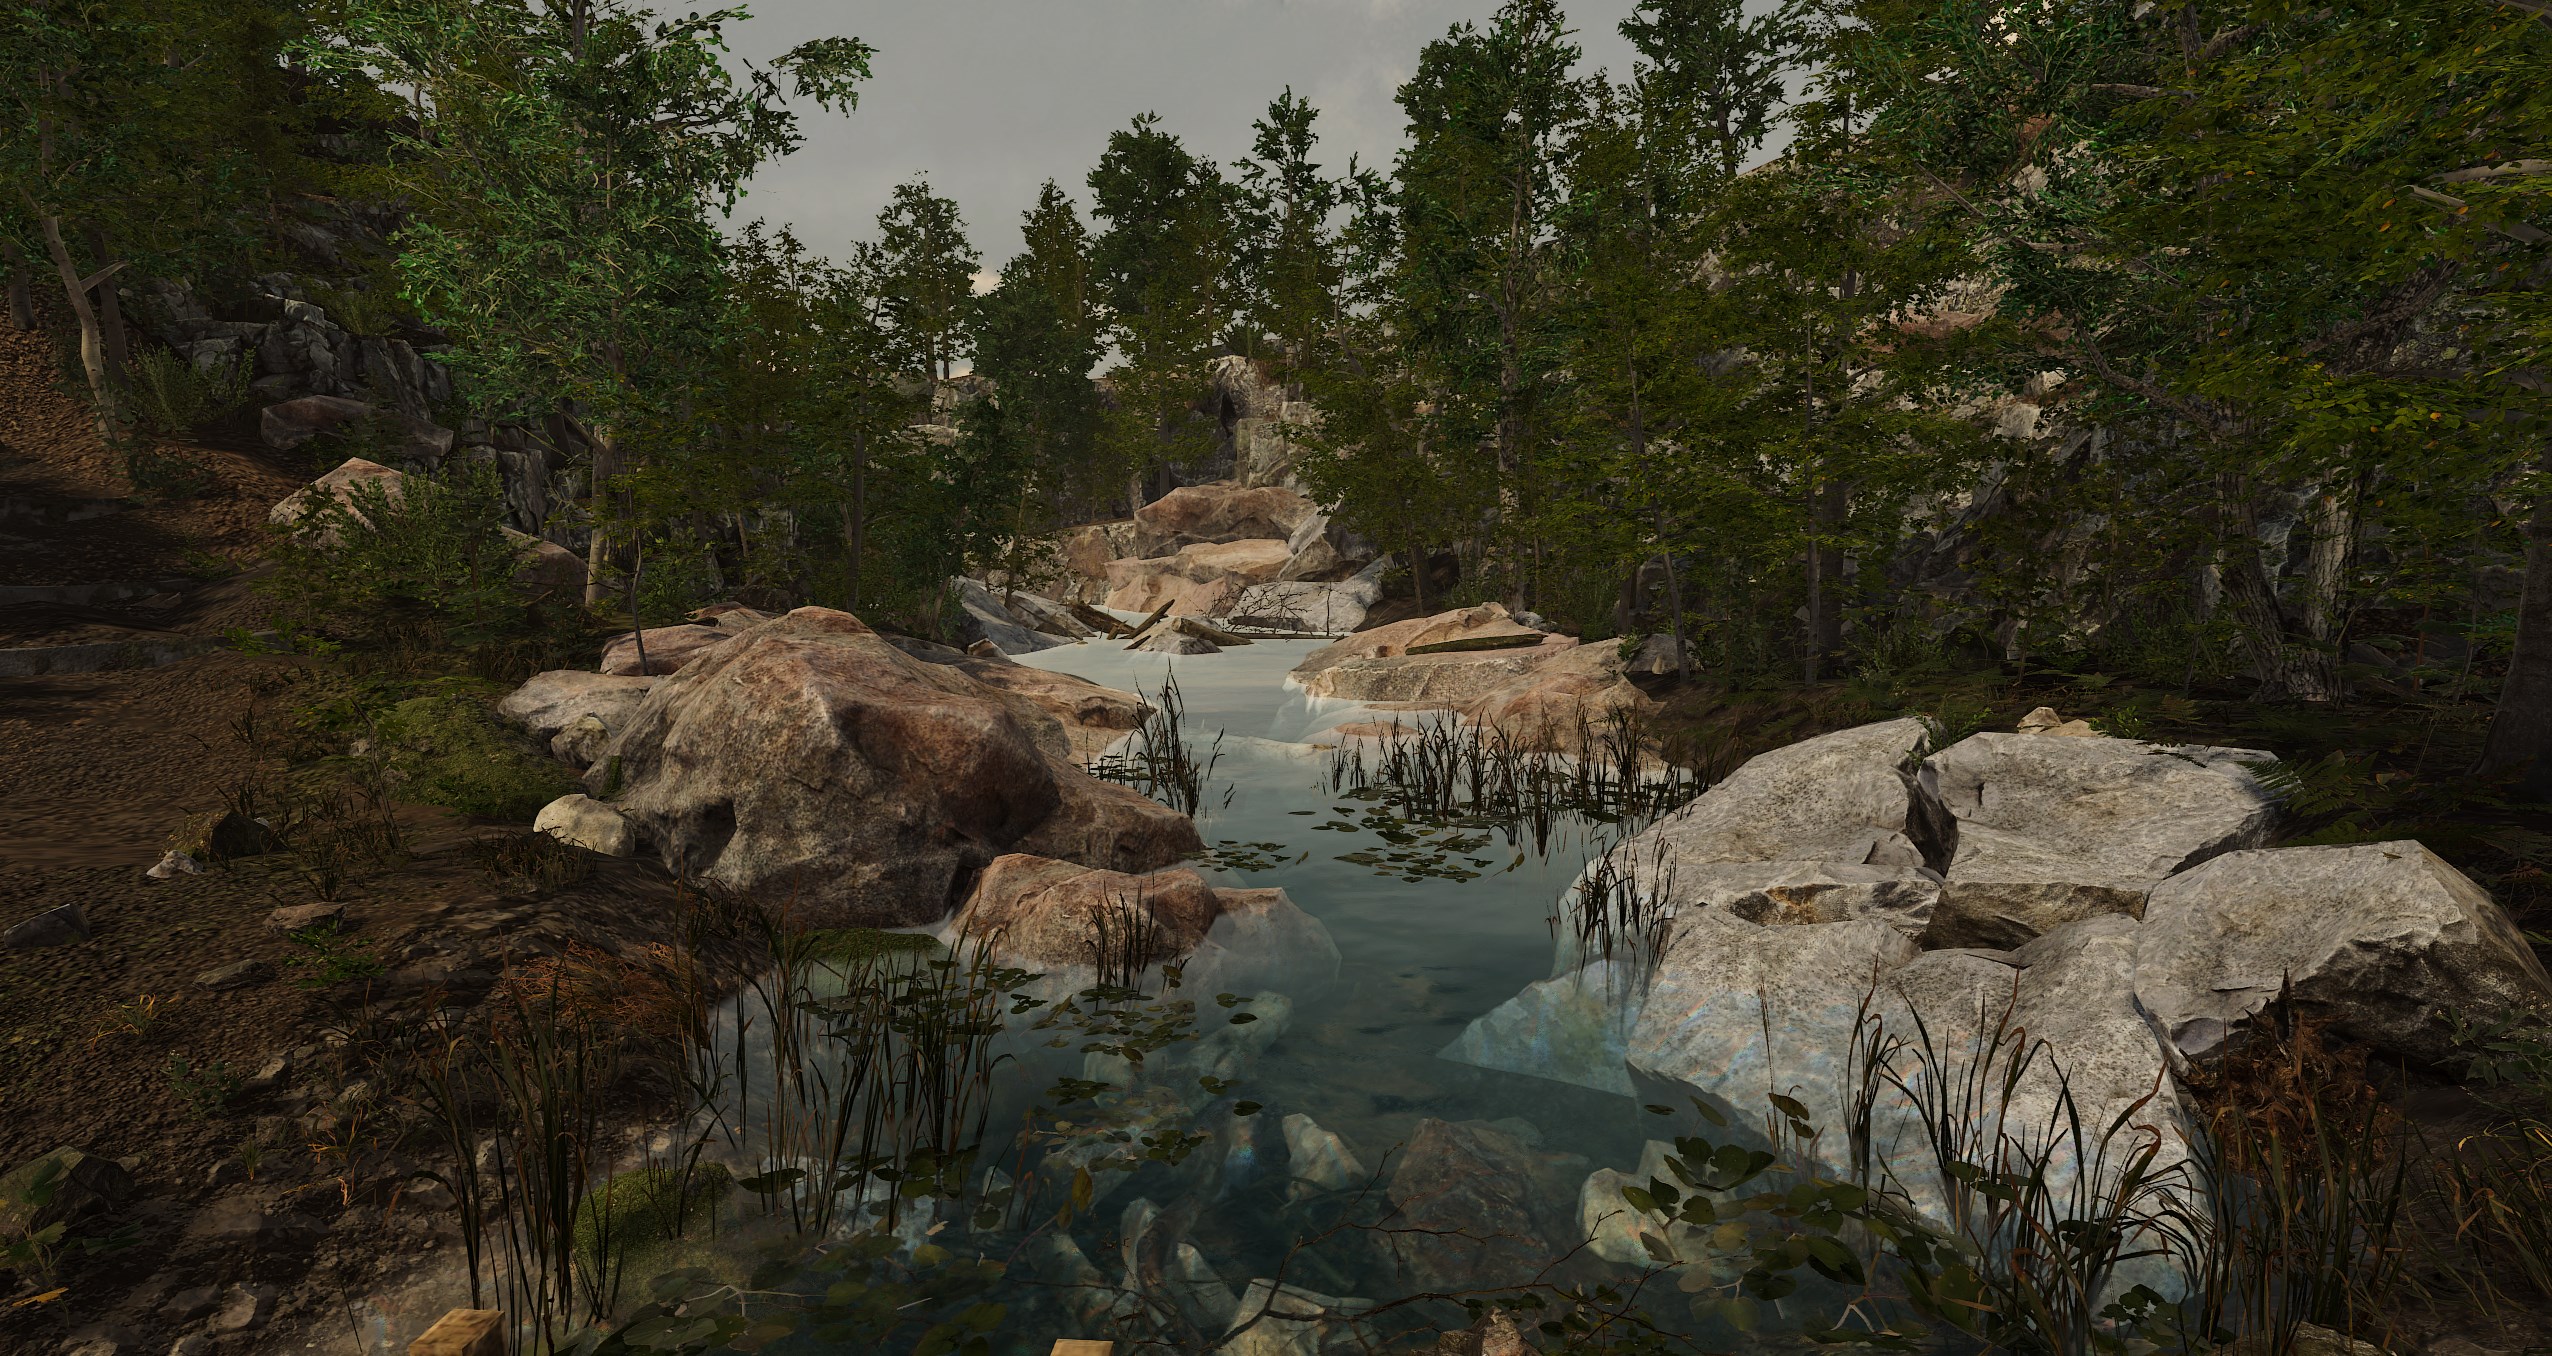 A rendering of a landscape scene of rocks, water and trees.